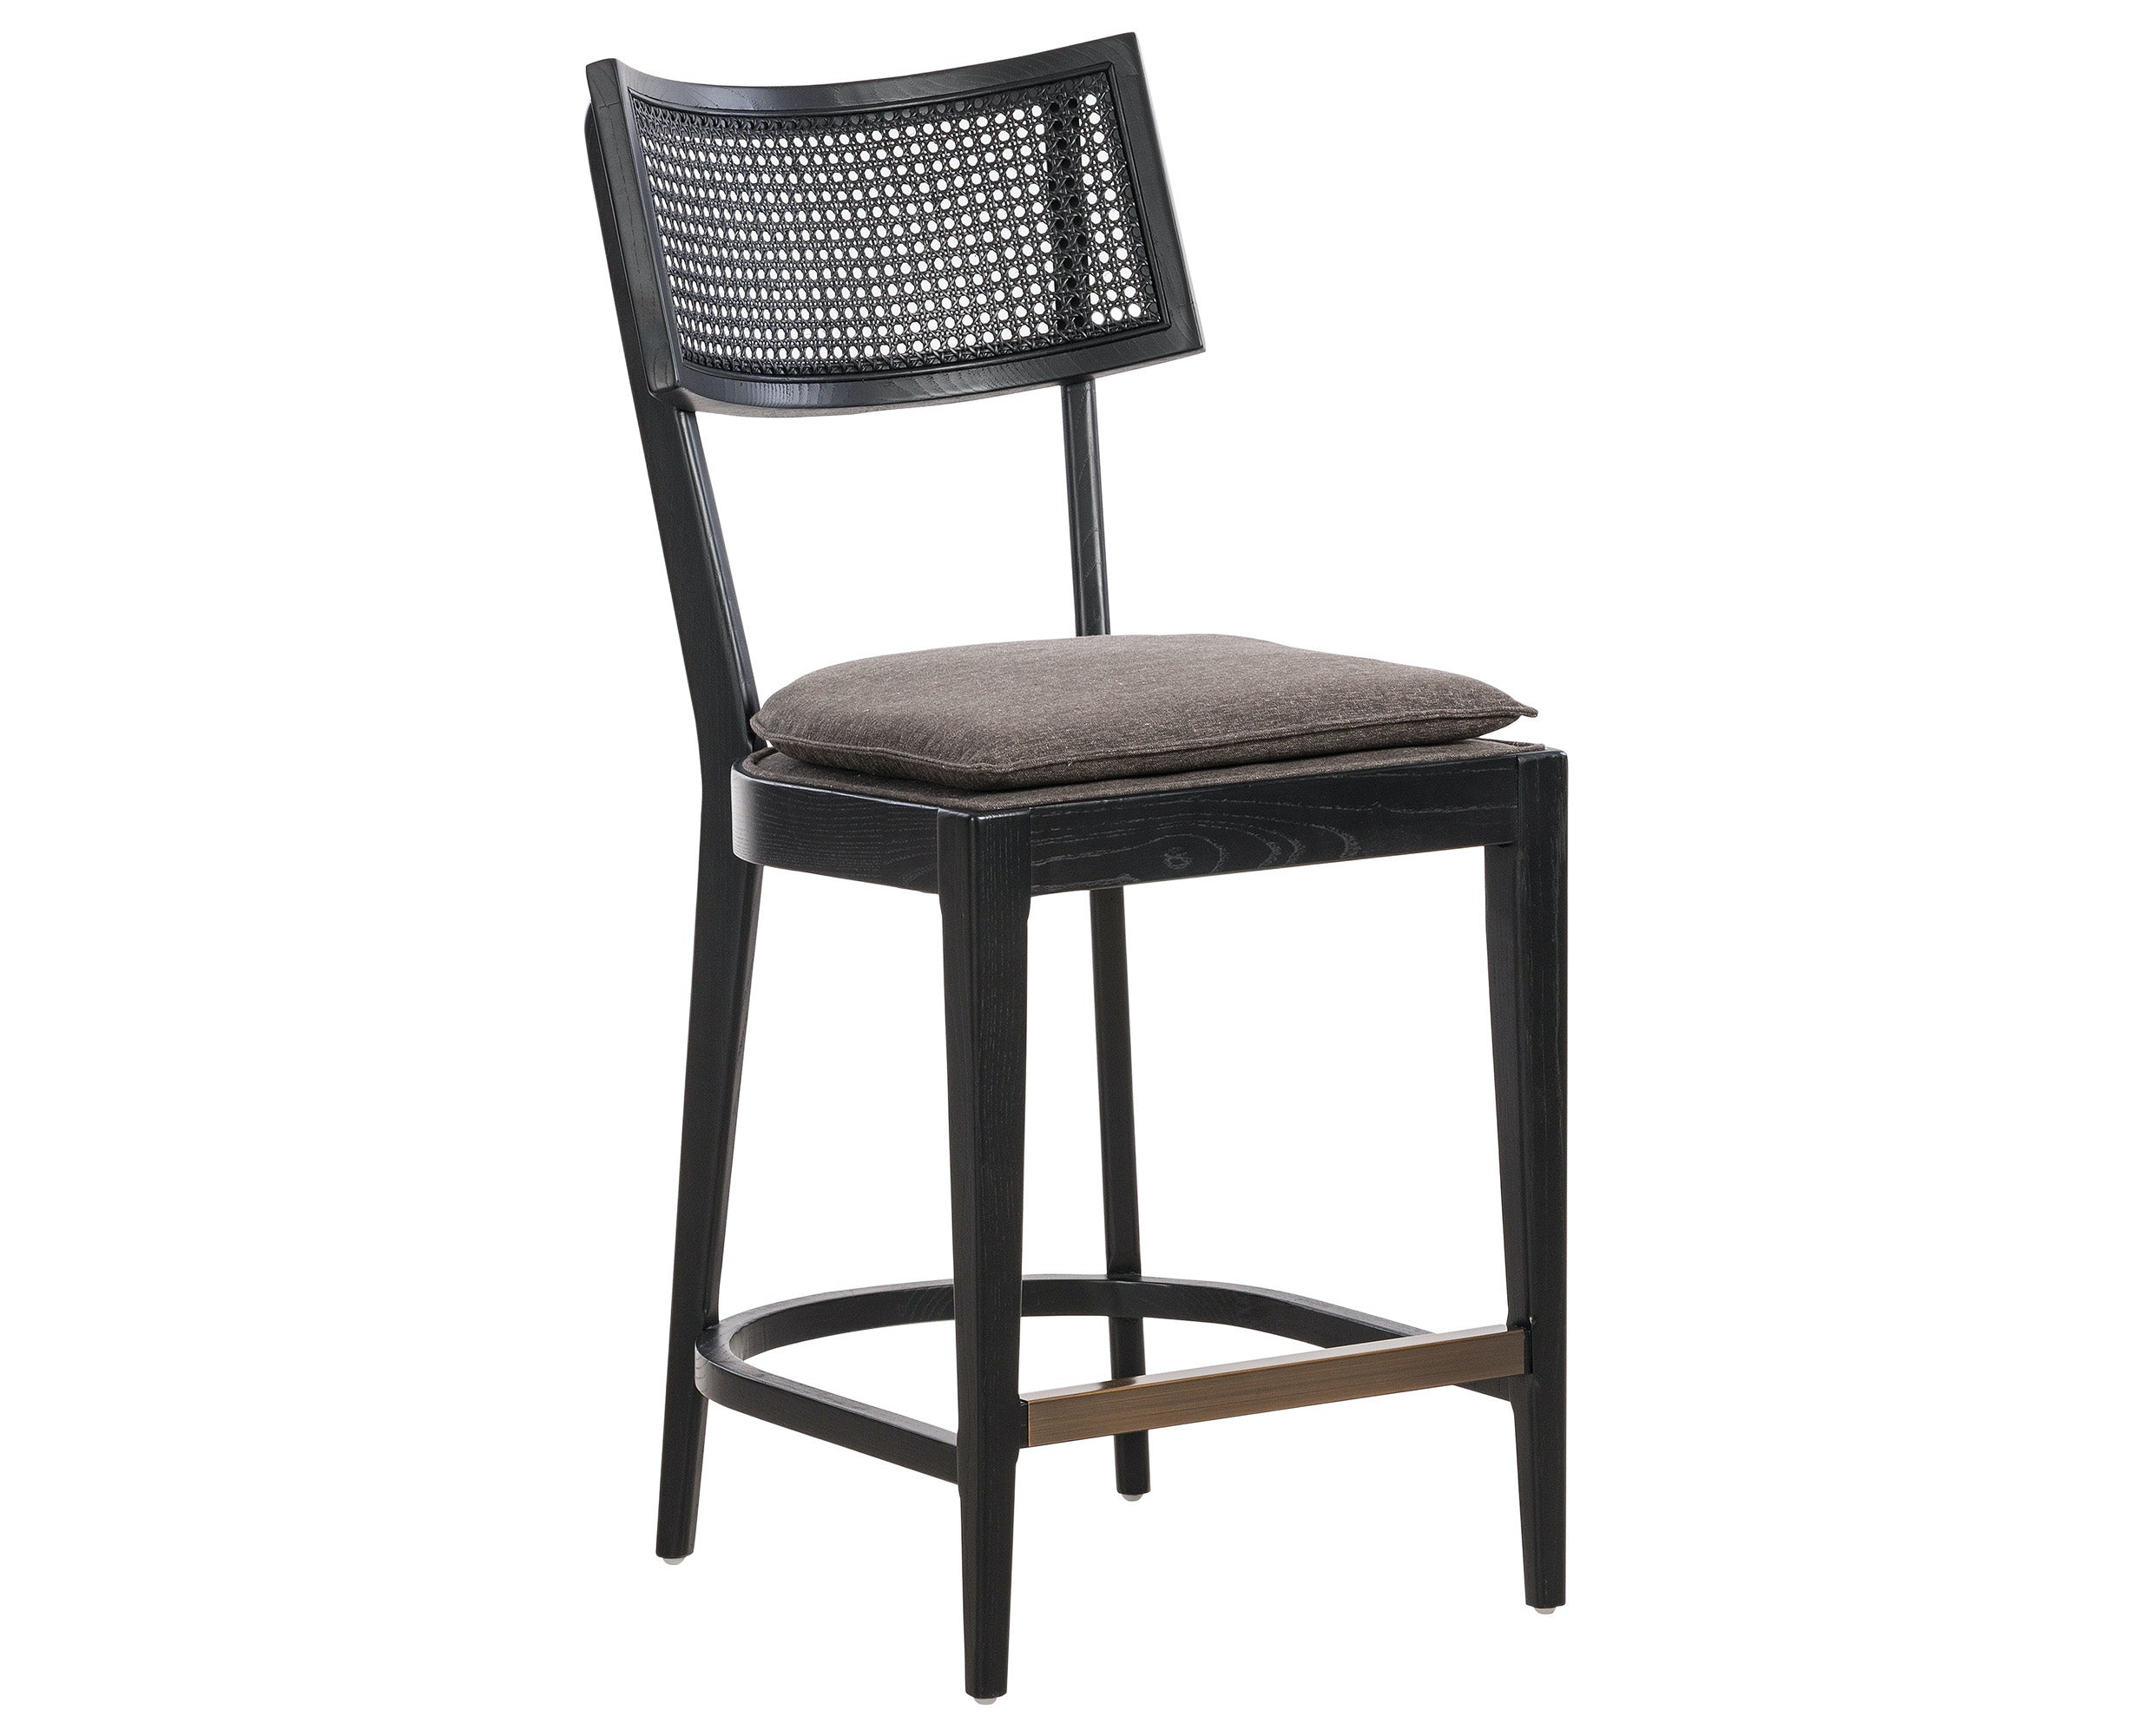 Savile Charcoal Fabric and Brushed Ebony Nettlewood with Brushed Ebony Cane and Brass Kickplate (Counter Height) | Britt Bar/Counter Stool | Valley Ridge Furniture